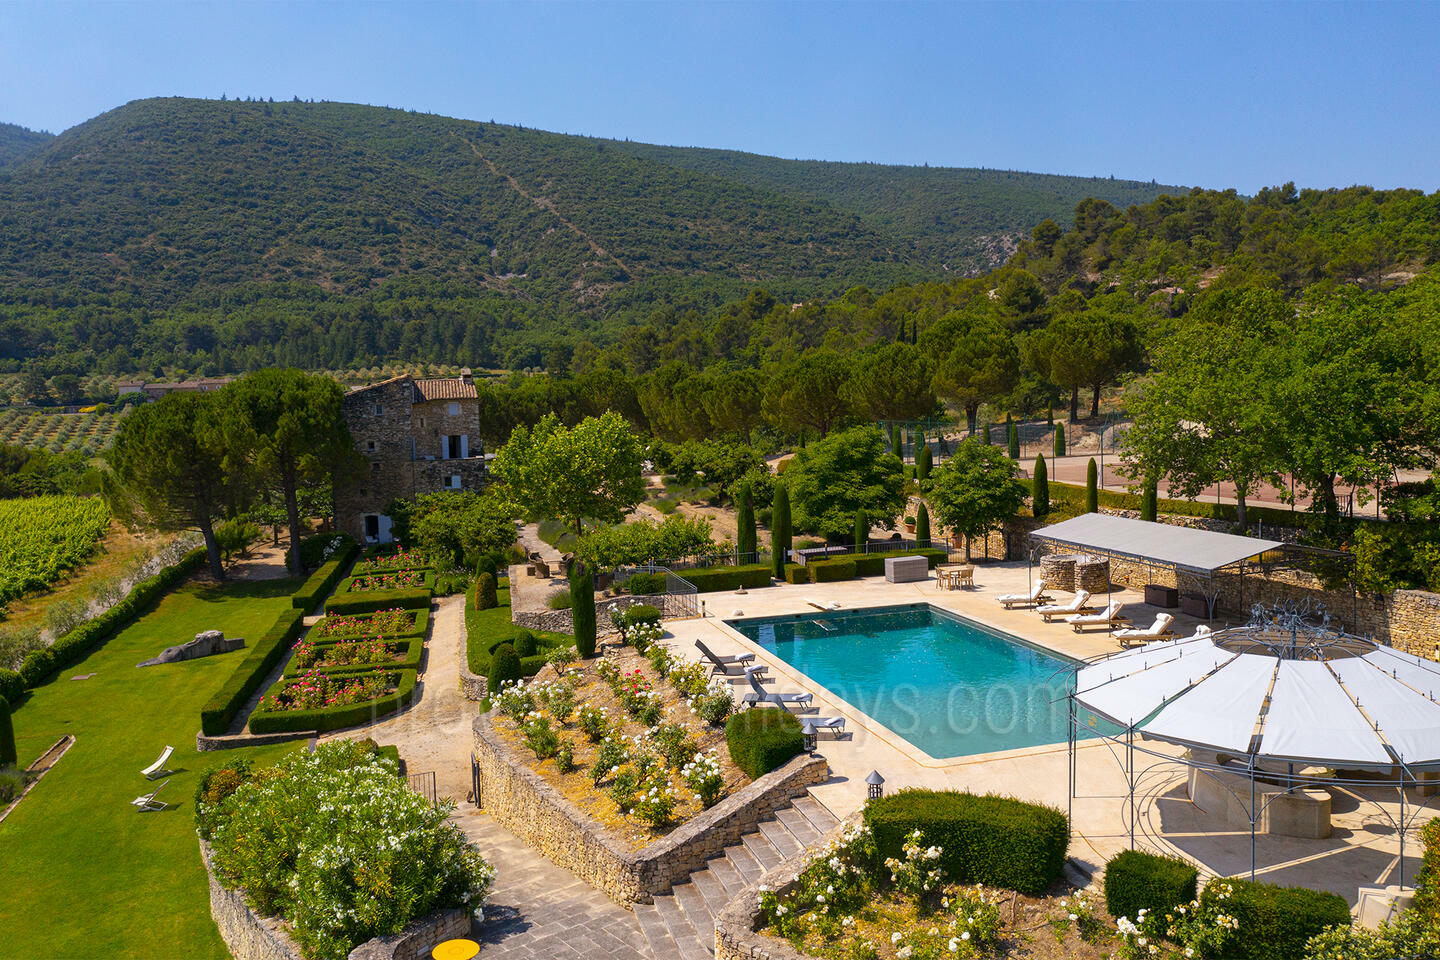 Gorgeous Property with Outstanding Views of Luberon Valley 1 - La Roseraie: Villa: Pool